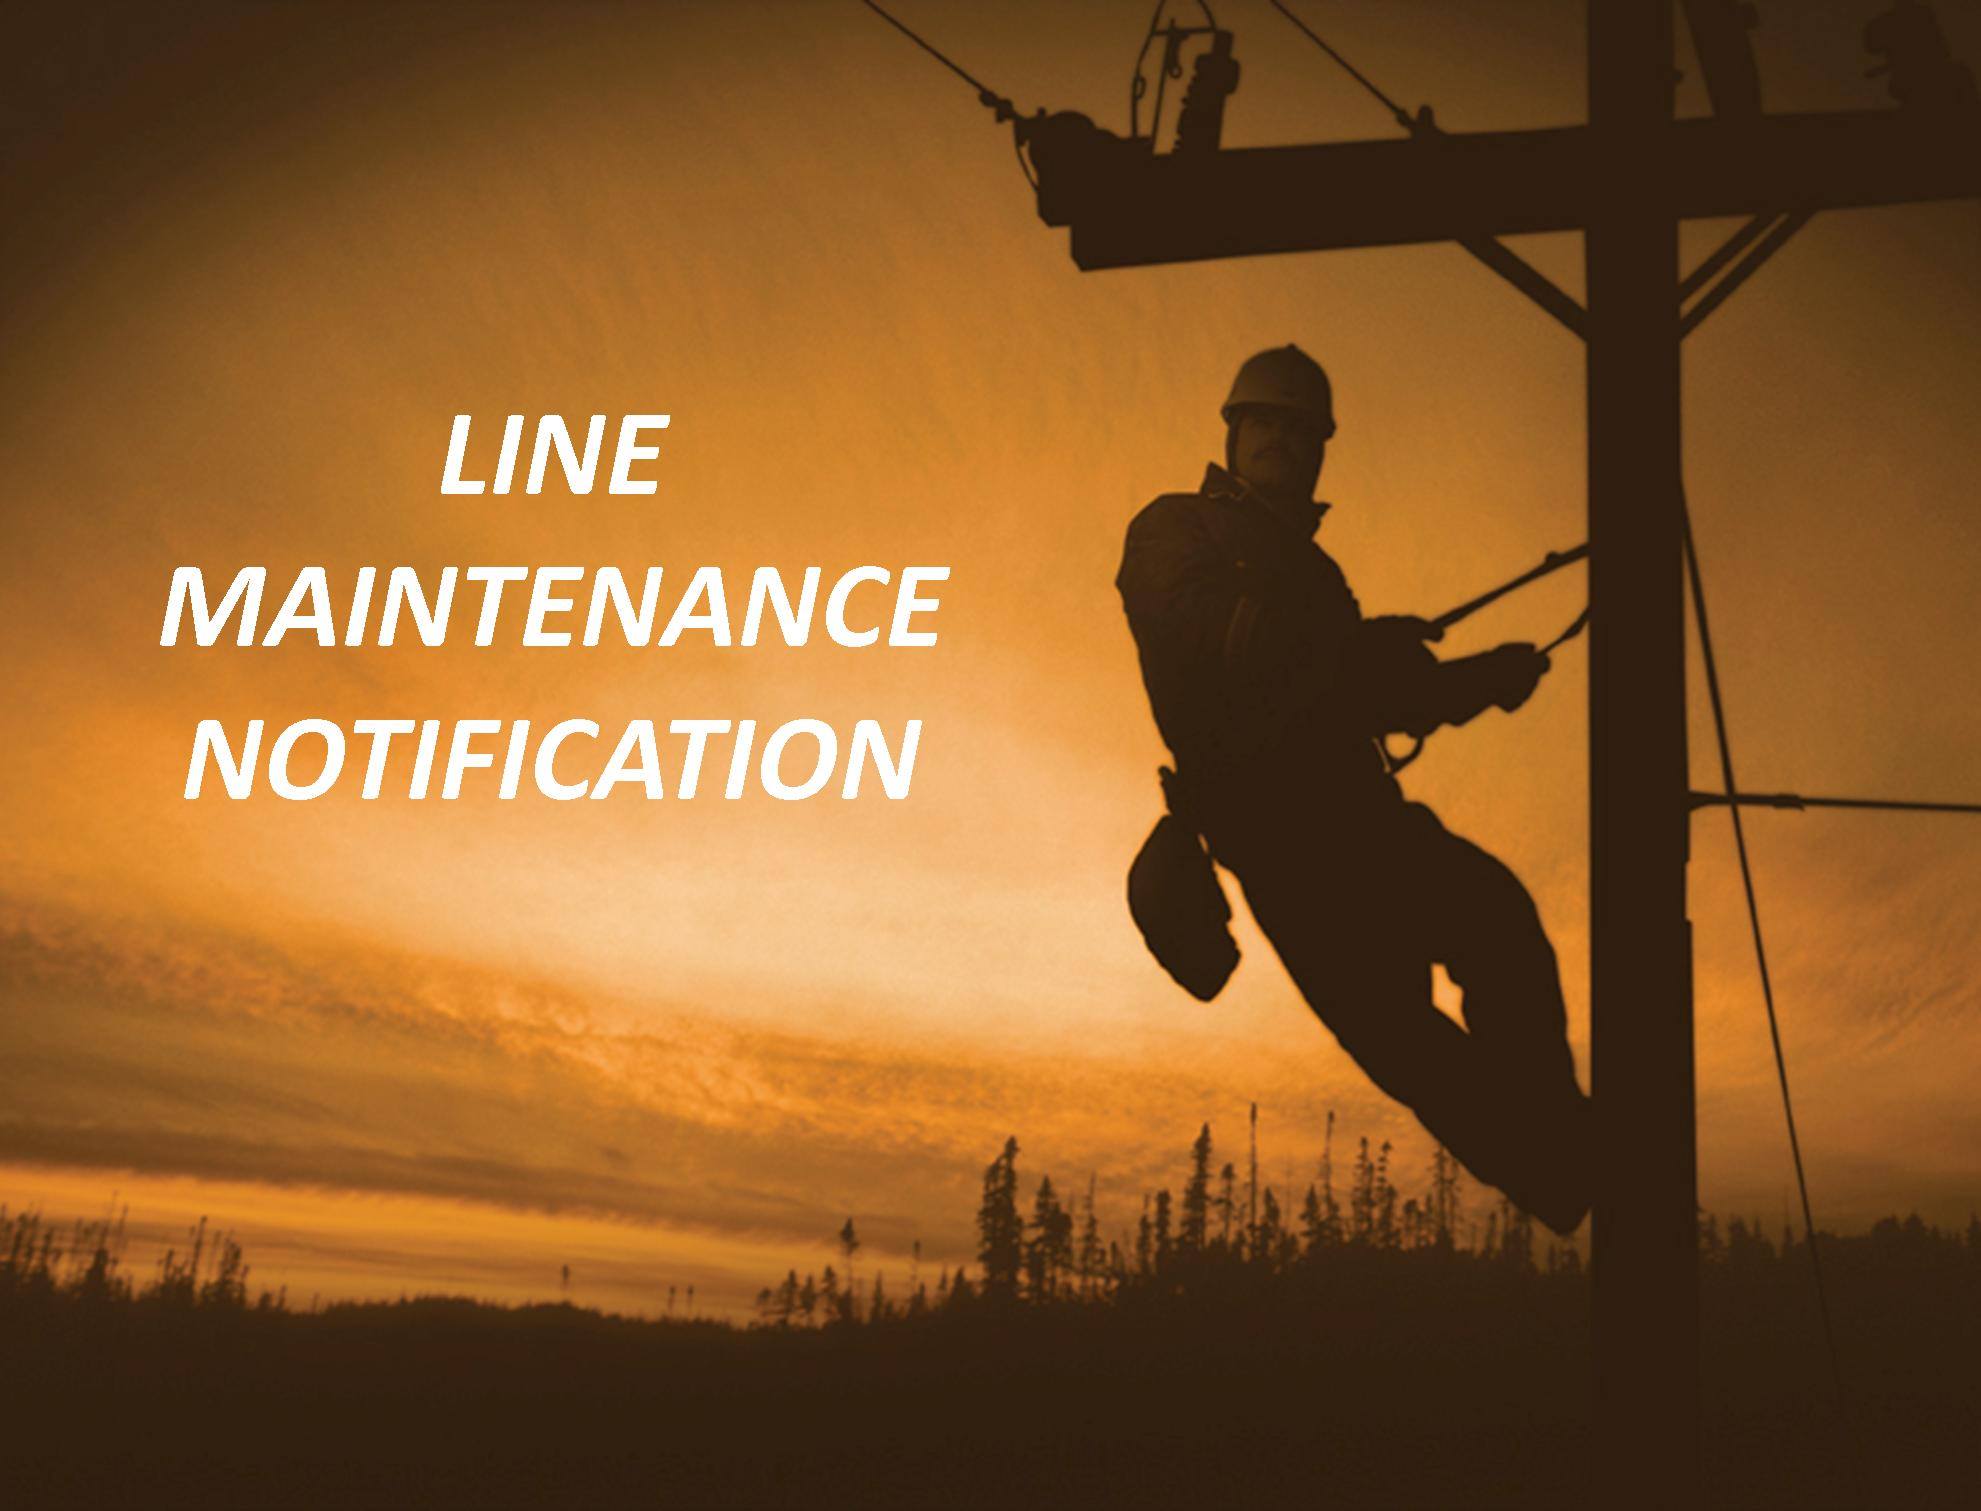 carroll-emc-line-maintenance-expected-on-august-14th-the-city-menus